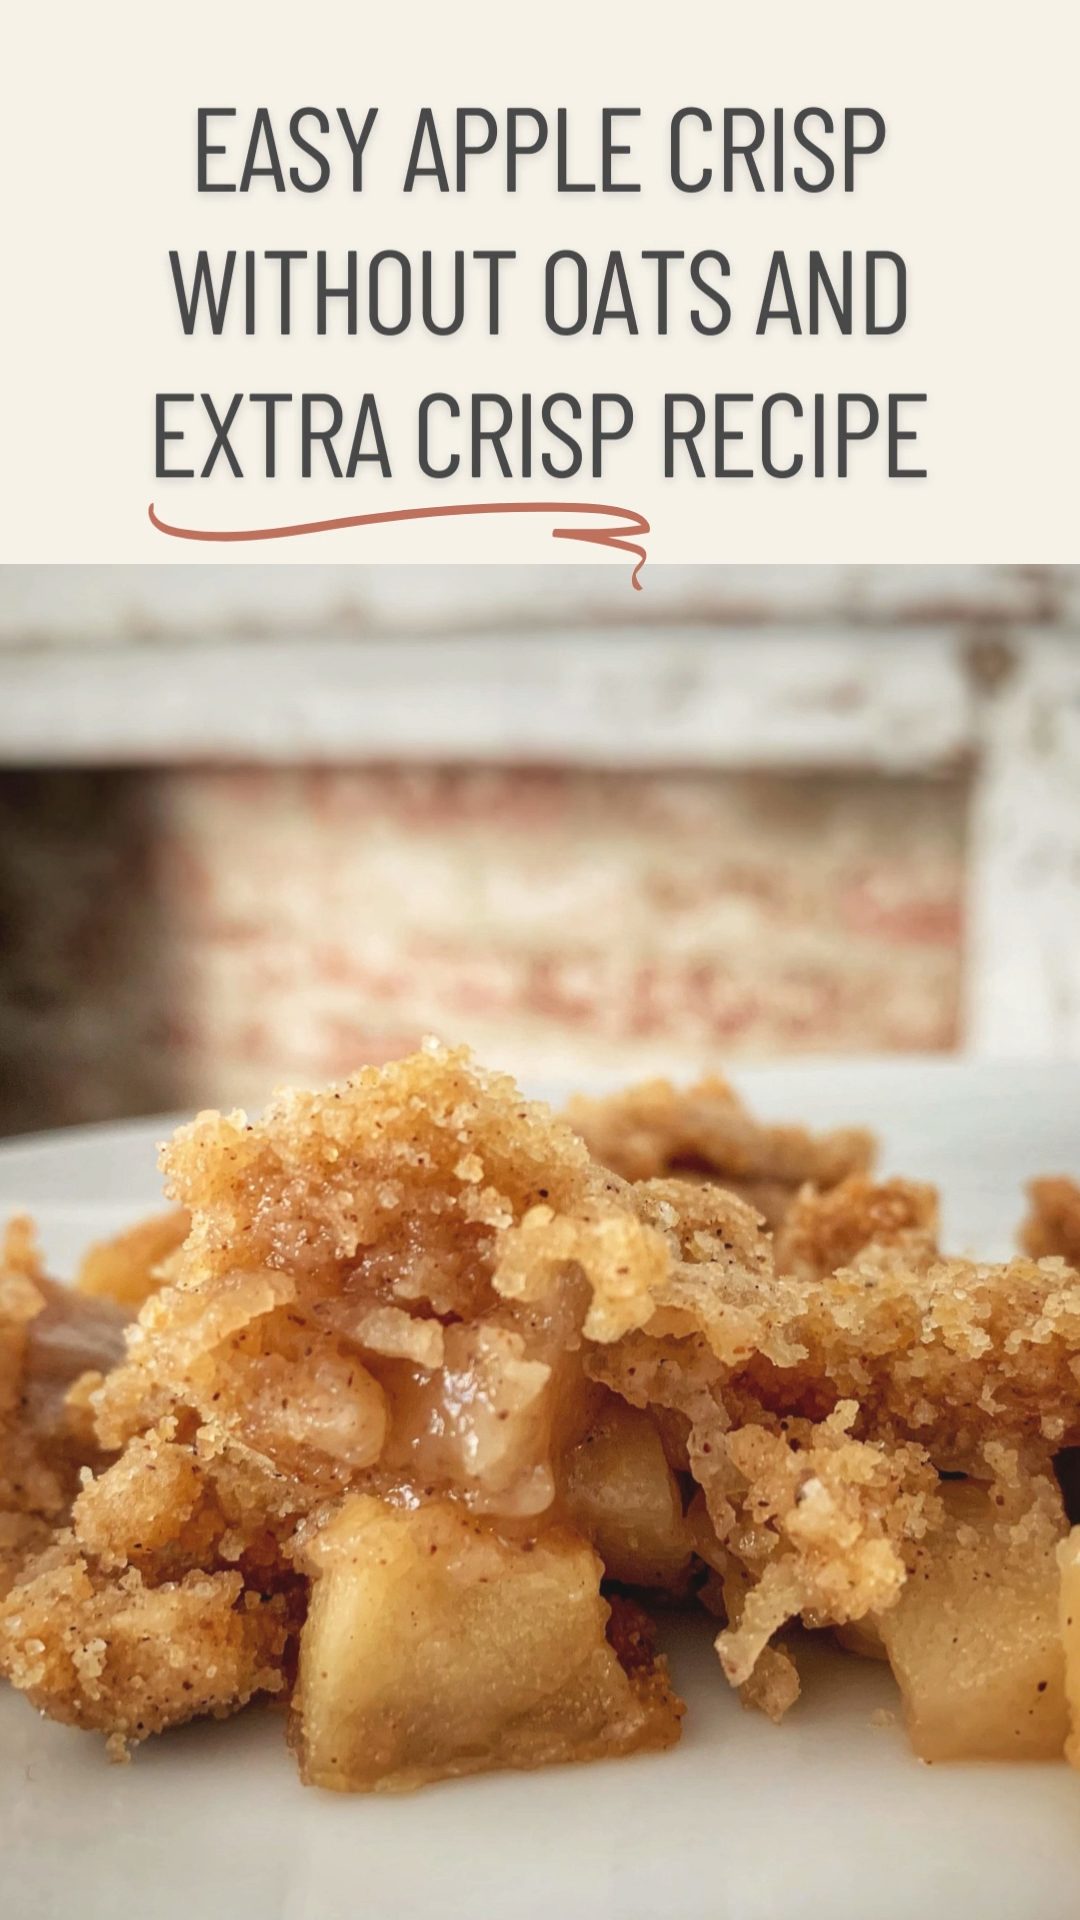 EASY-APPLE-CRISP-WITHOUT-OATS-AND-EXTRA-CRISP-RECIPE-poster